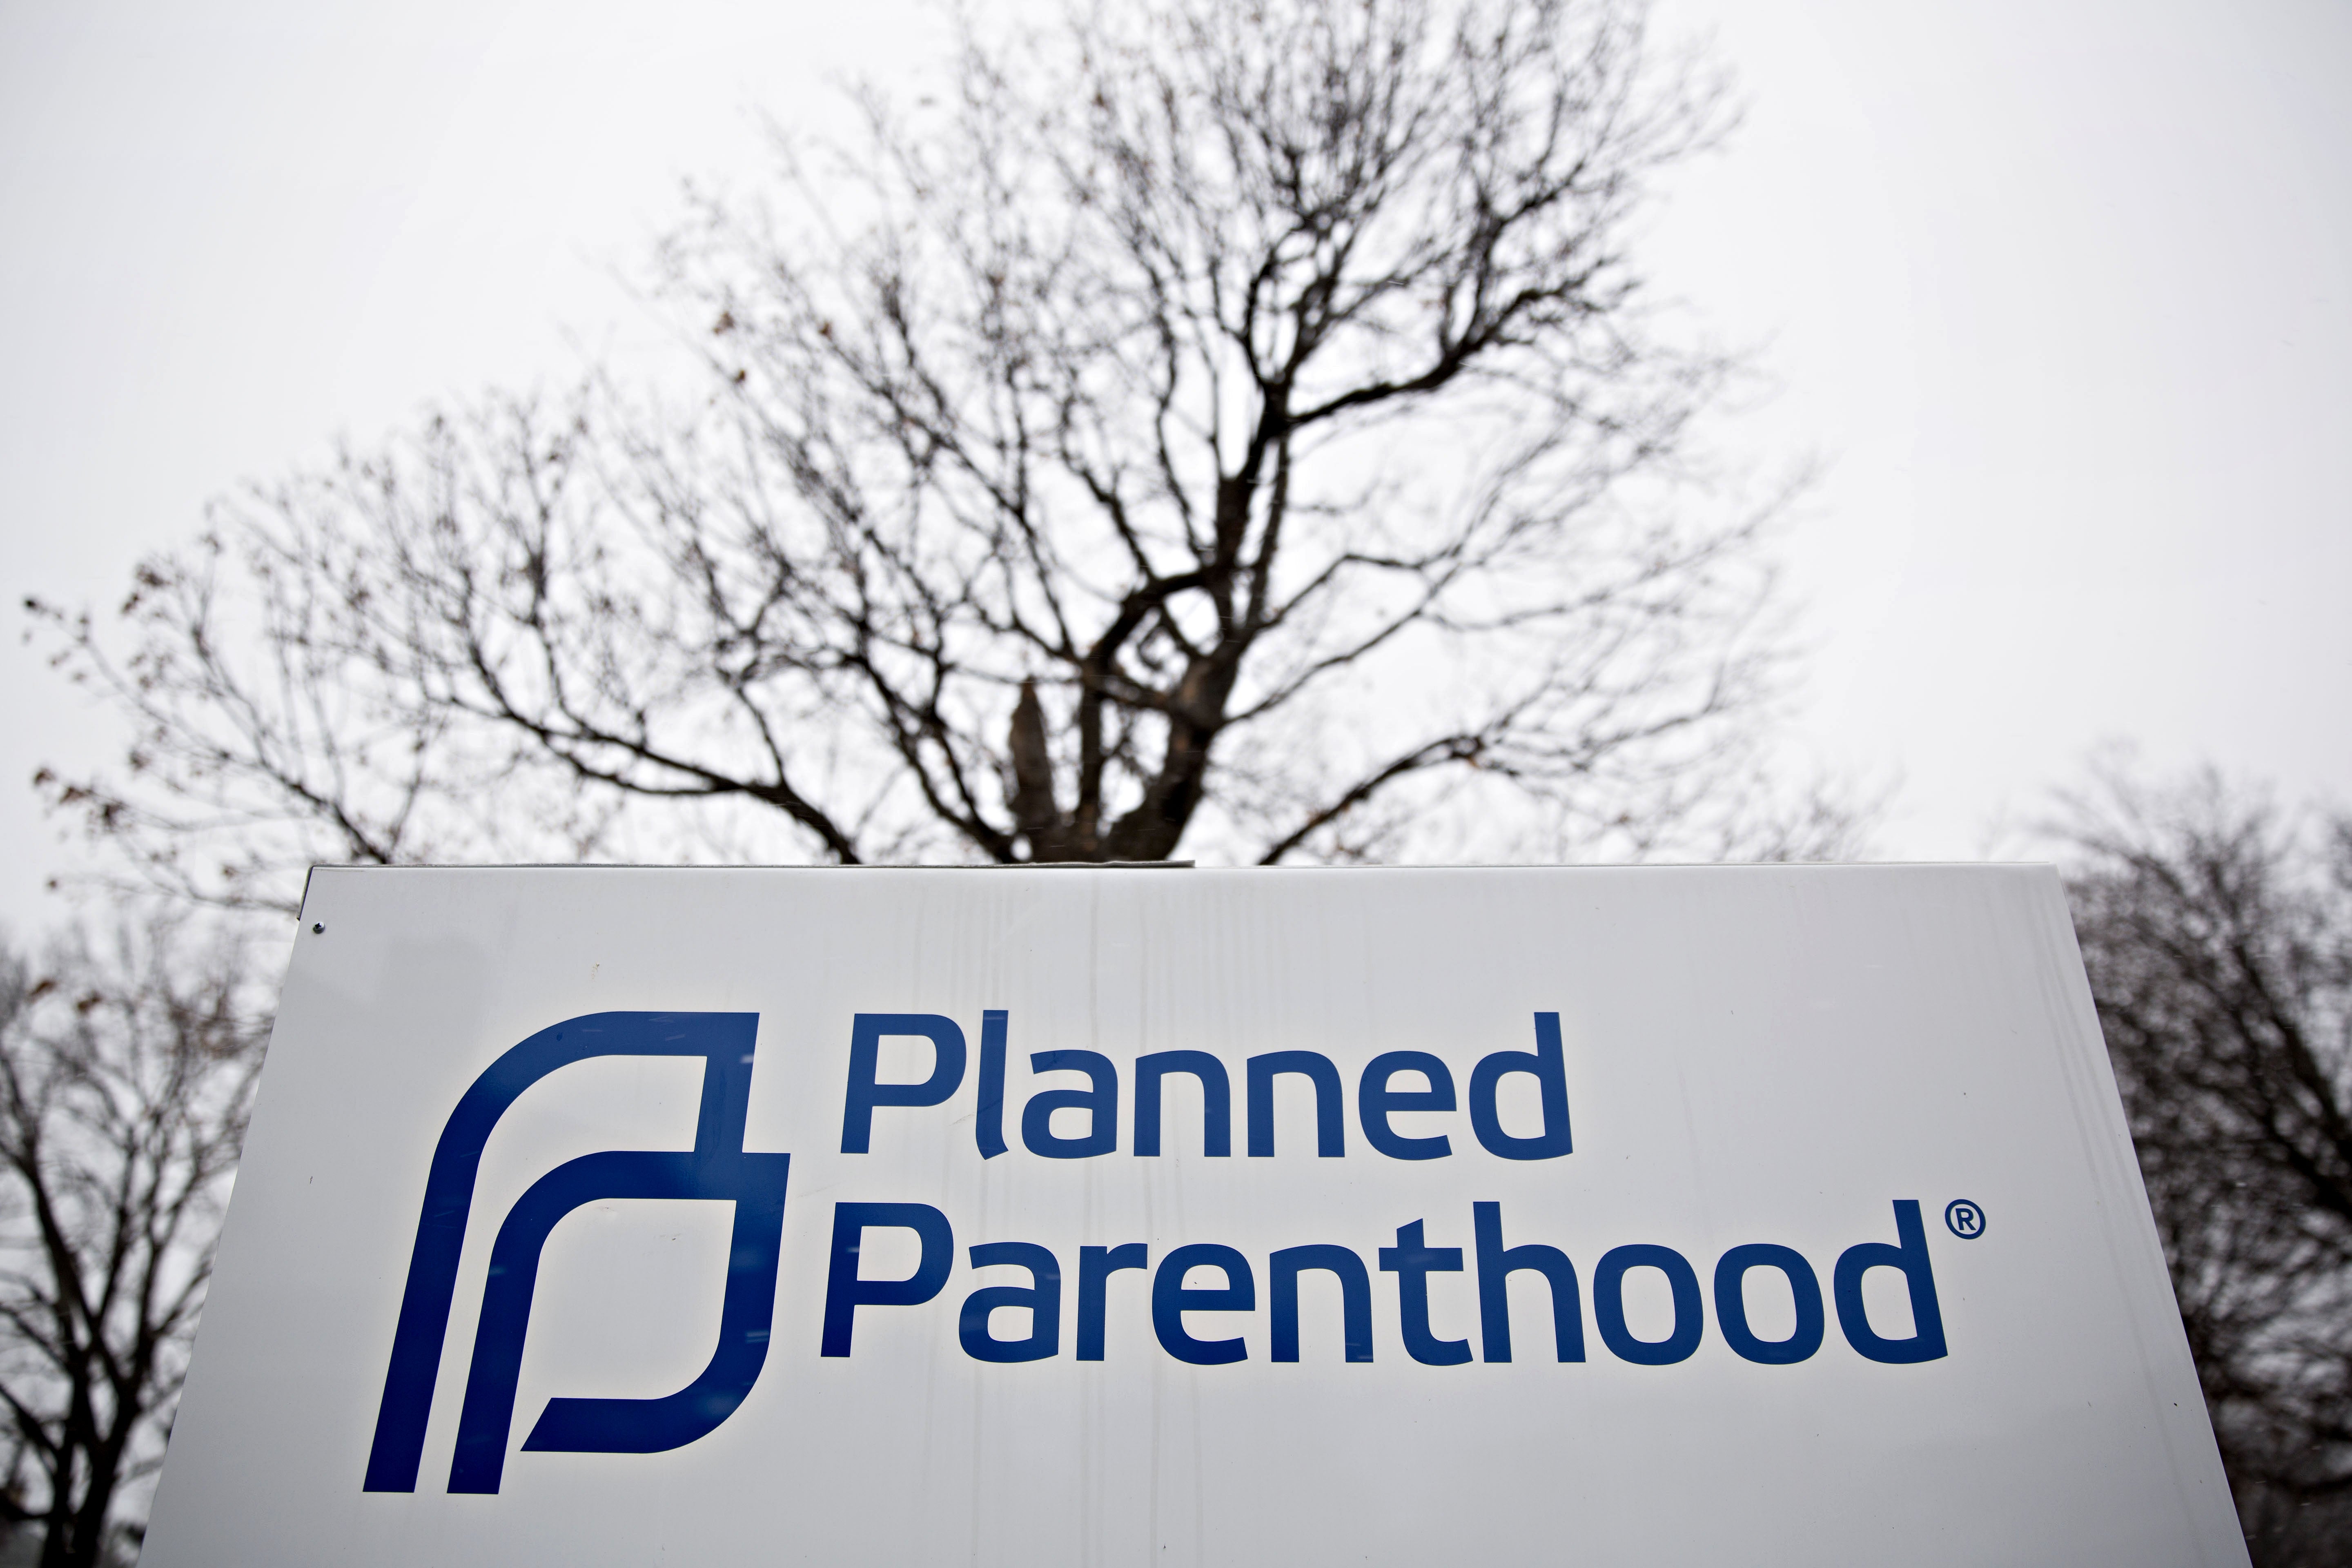 Texas Judge: Medicaid Dollars Will Go To Planned Parenthood
